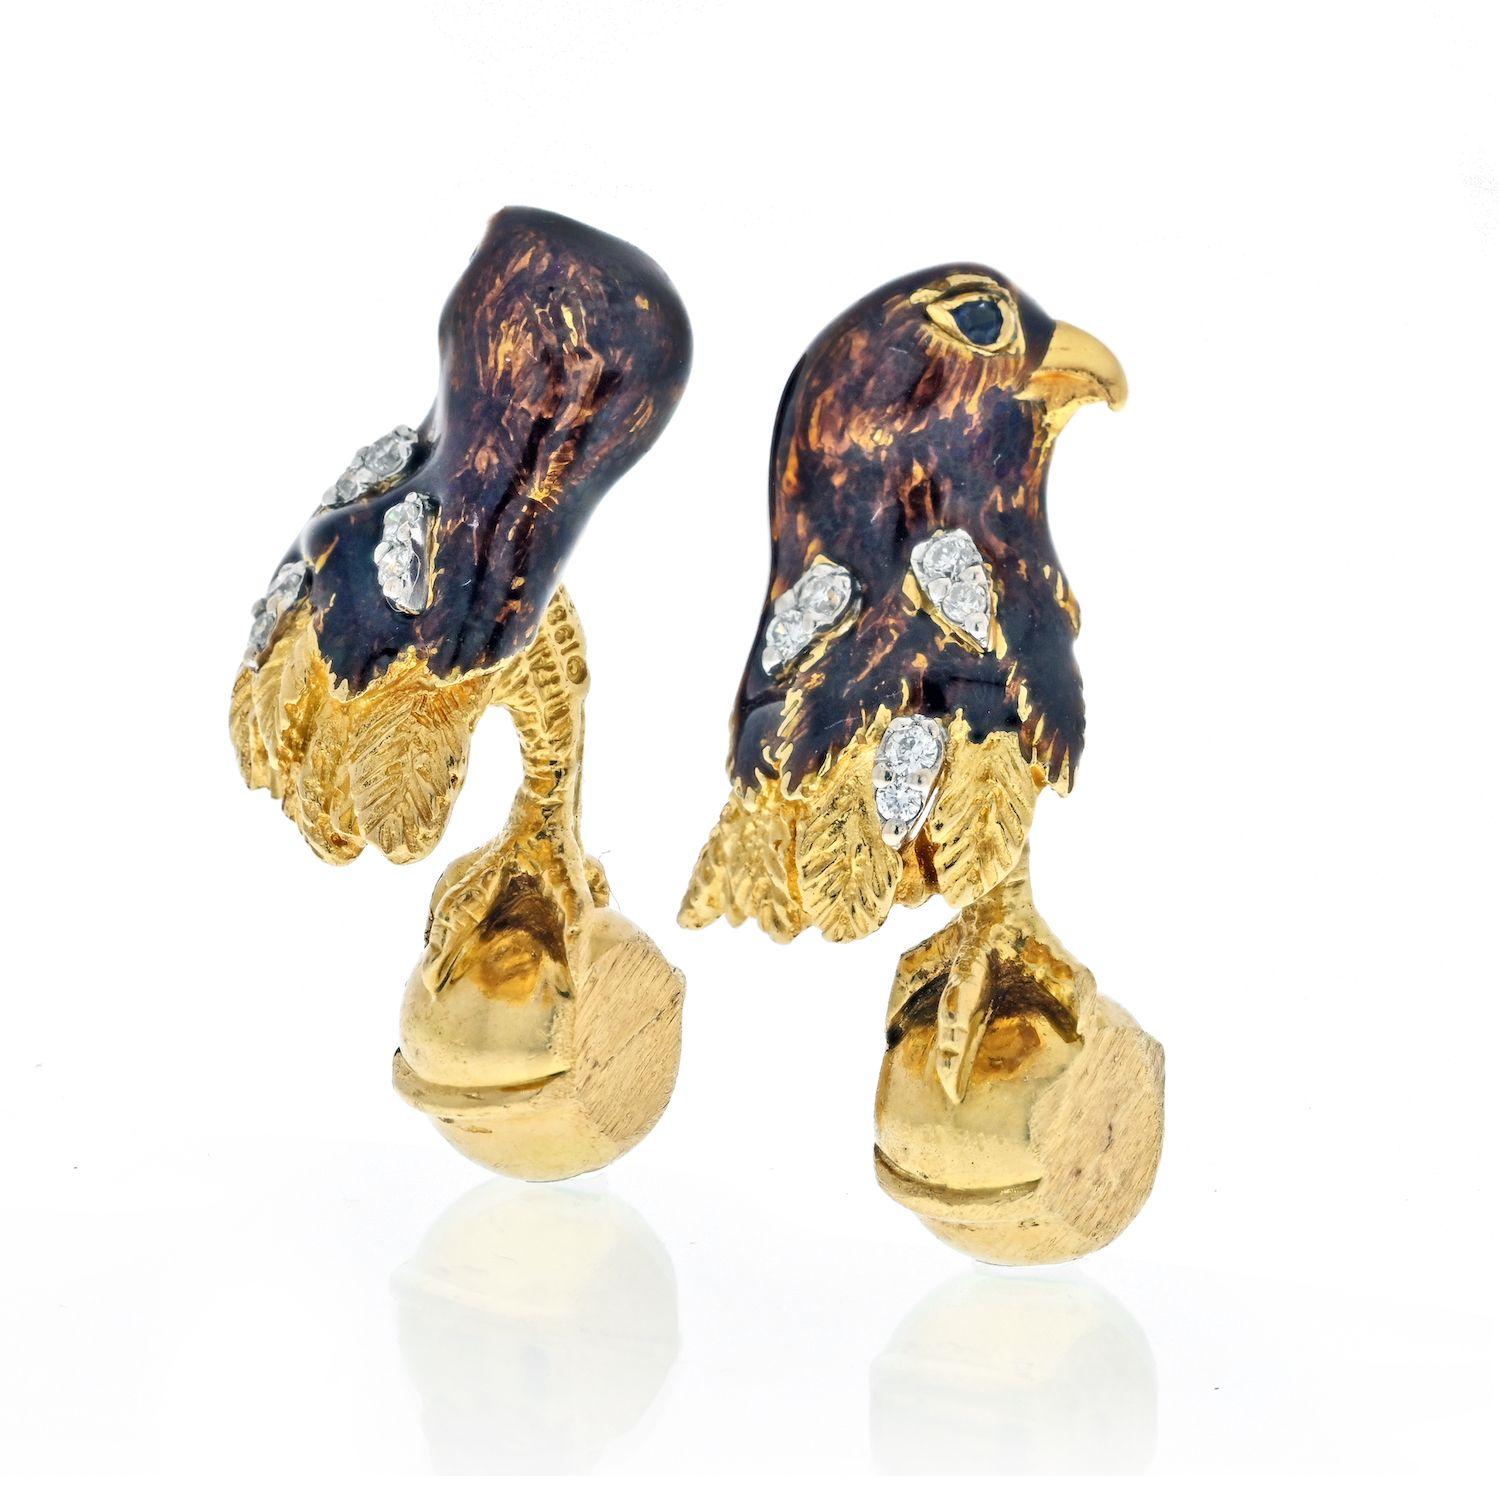 Vintage Estate Tiffany & Co 18K Yellow Gold, Enamel Falcon Cufflinks.
Wise-up your dress shirt with these super fine bird cufflinks. The face is painted in iridescent translucent enamel and highlighted with round cut diamonds as feathers. Length: